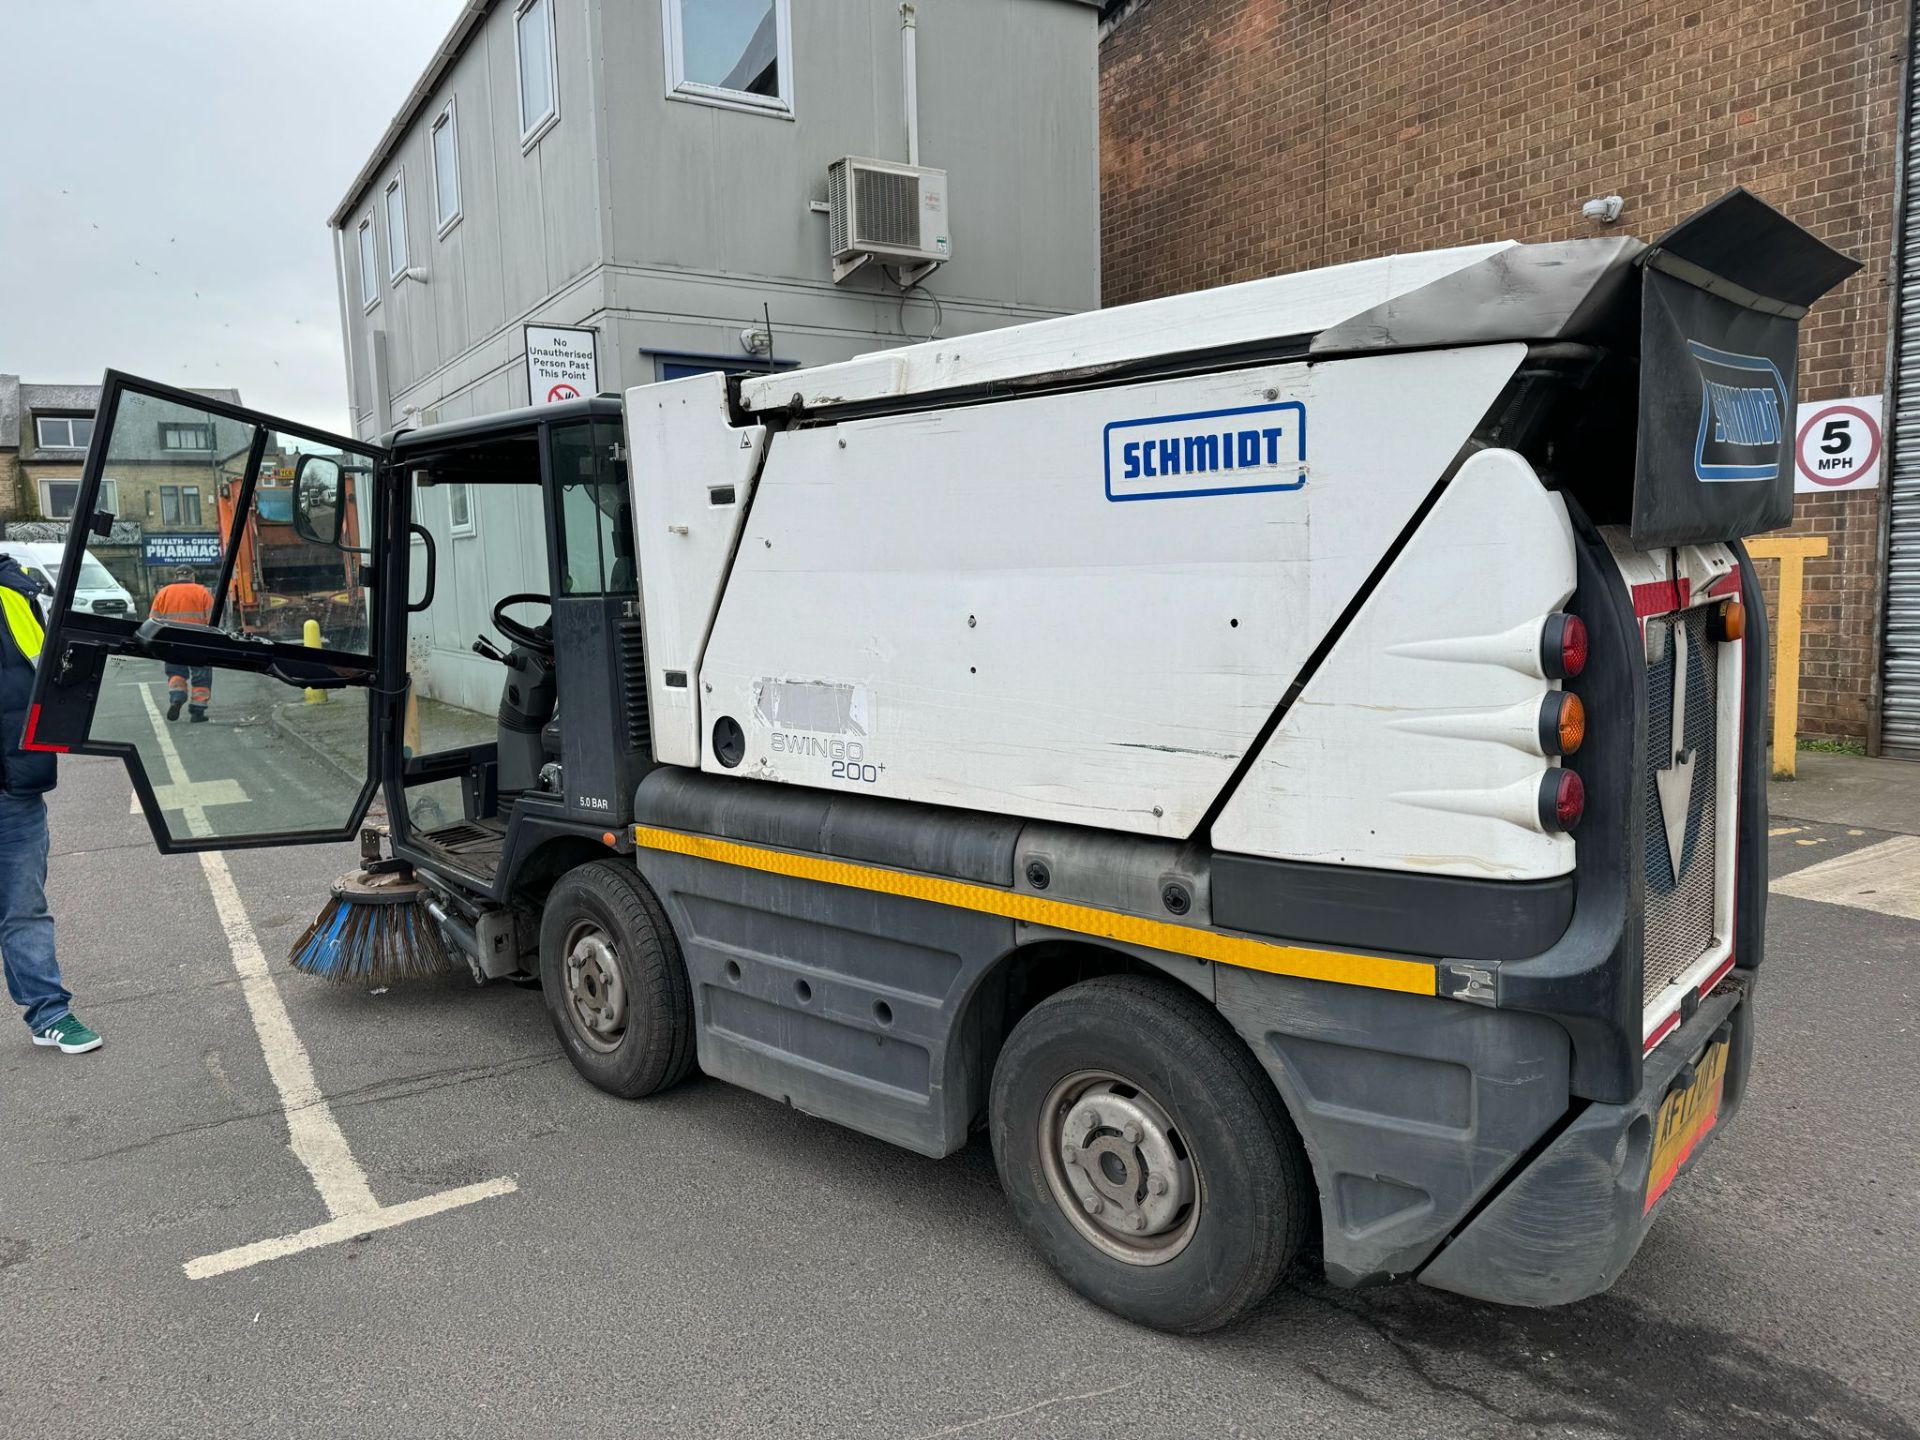 2017, SCHMIDT - Compact 200 Road Sweeper (Ex-Council fleet owned and maintained) - Image 5 of 32